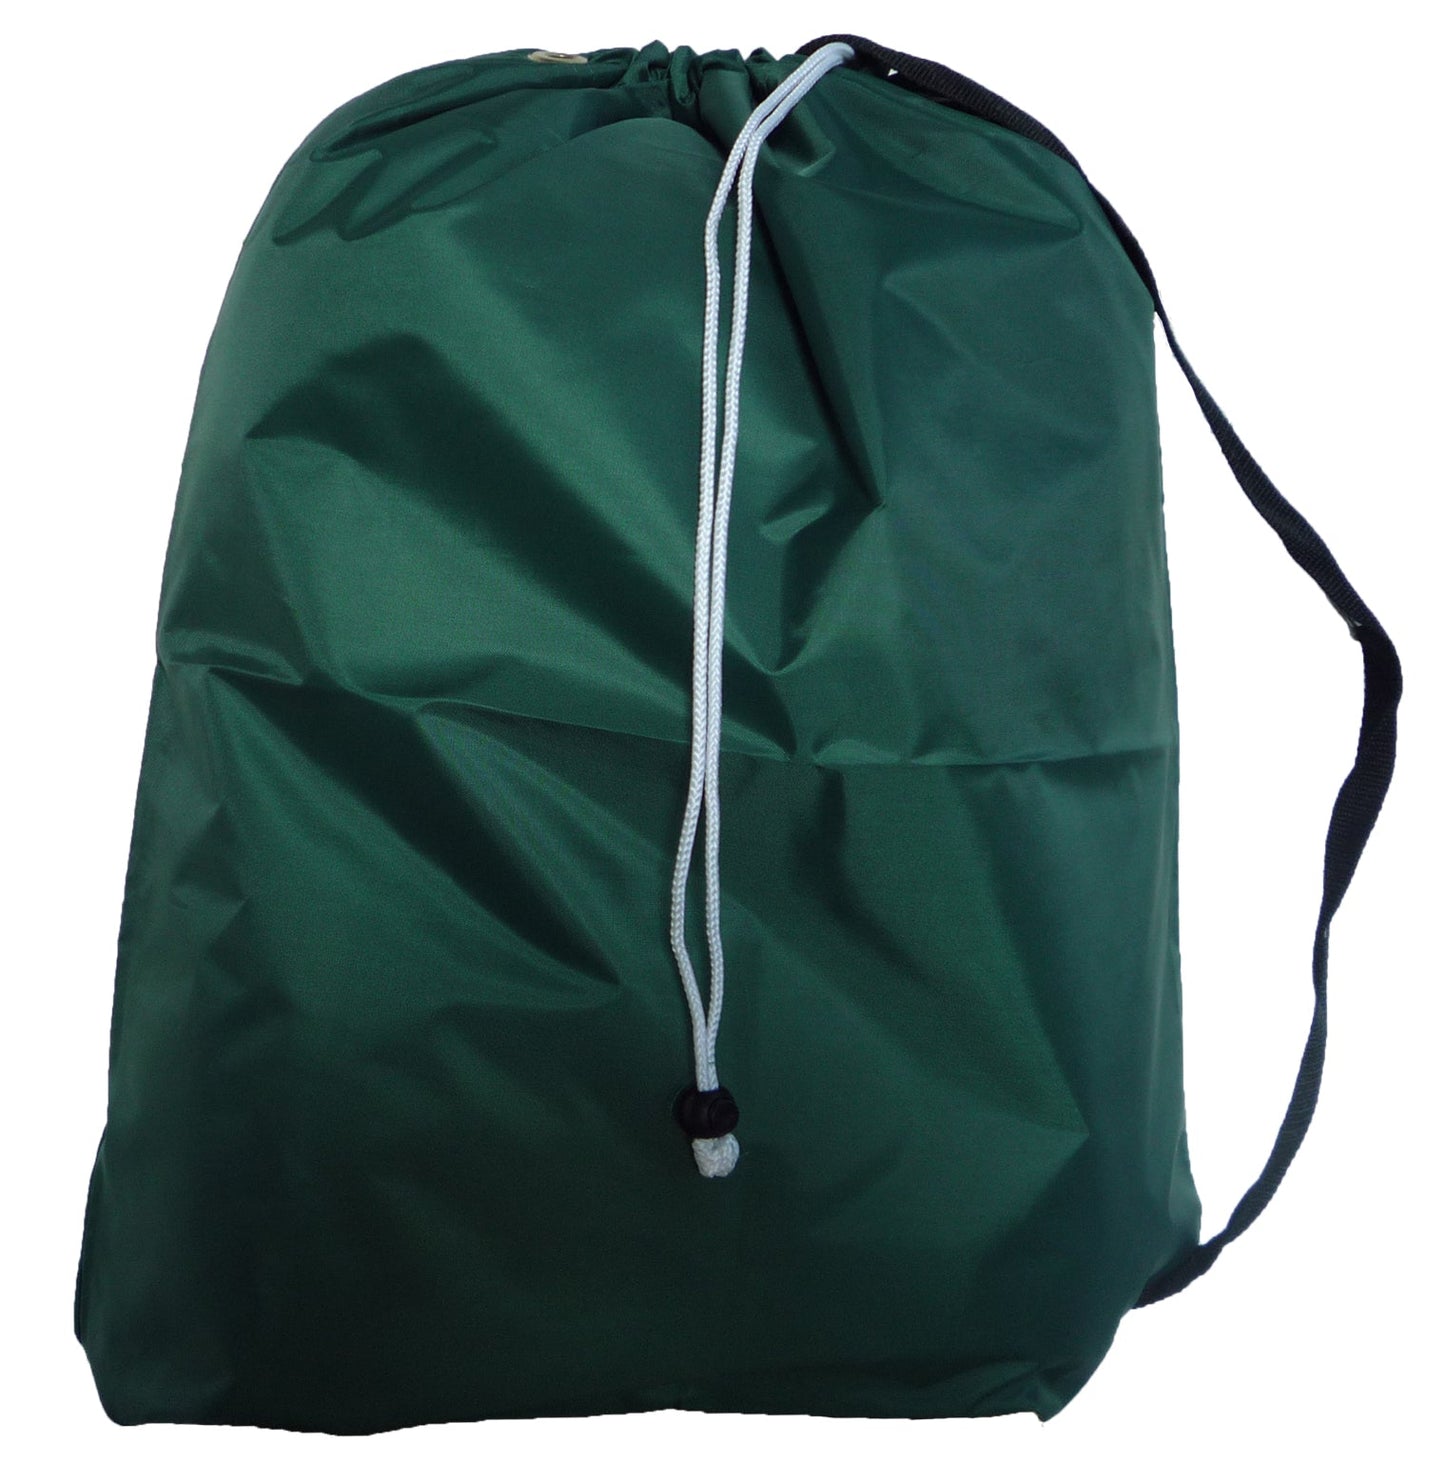 Medium Laundry Bag with Strap, Forest Green